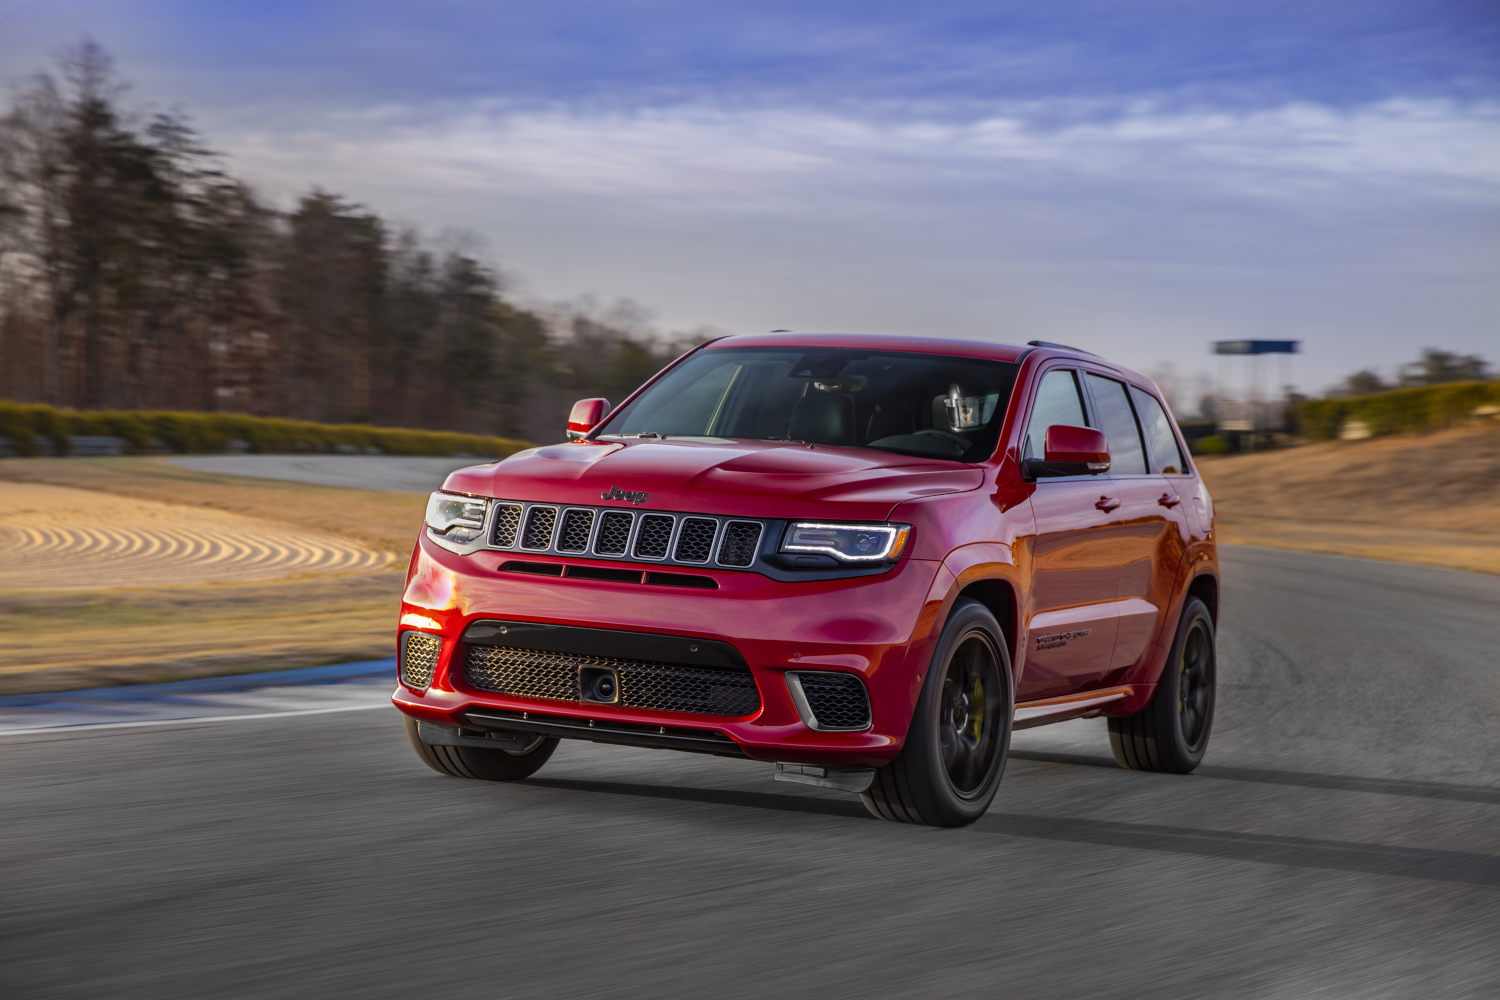 The best used Jeep SUVs include this Grand Cherokee